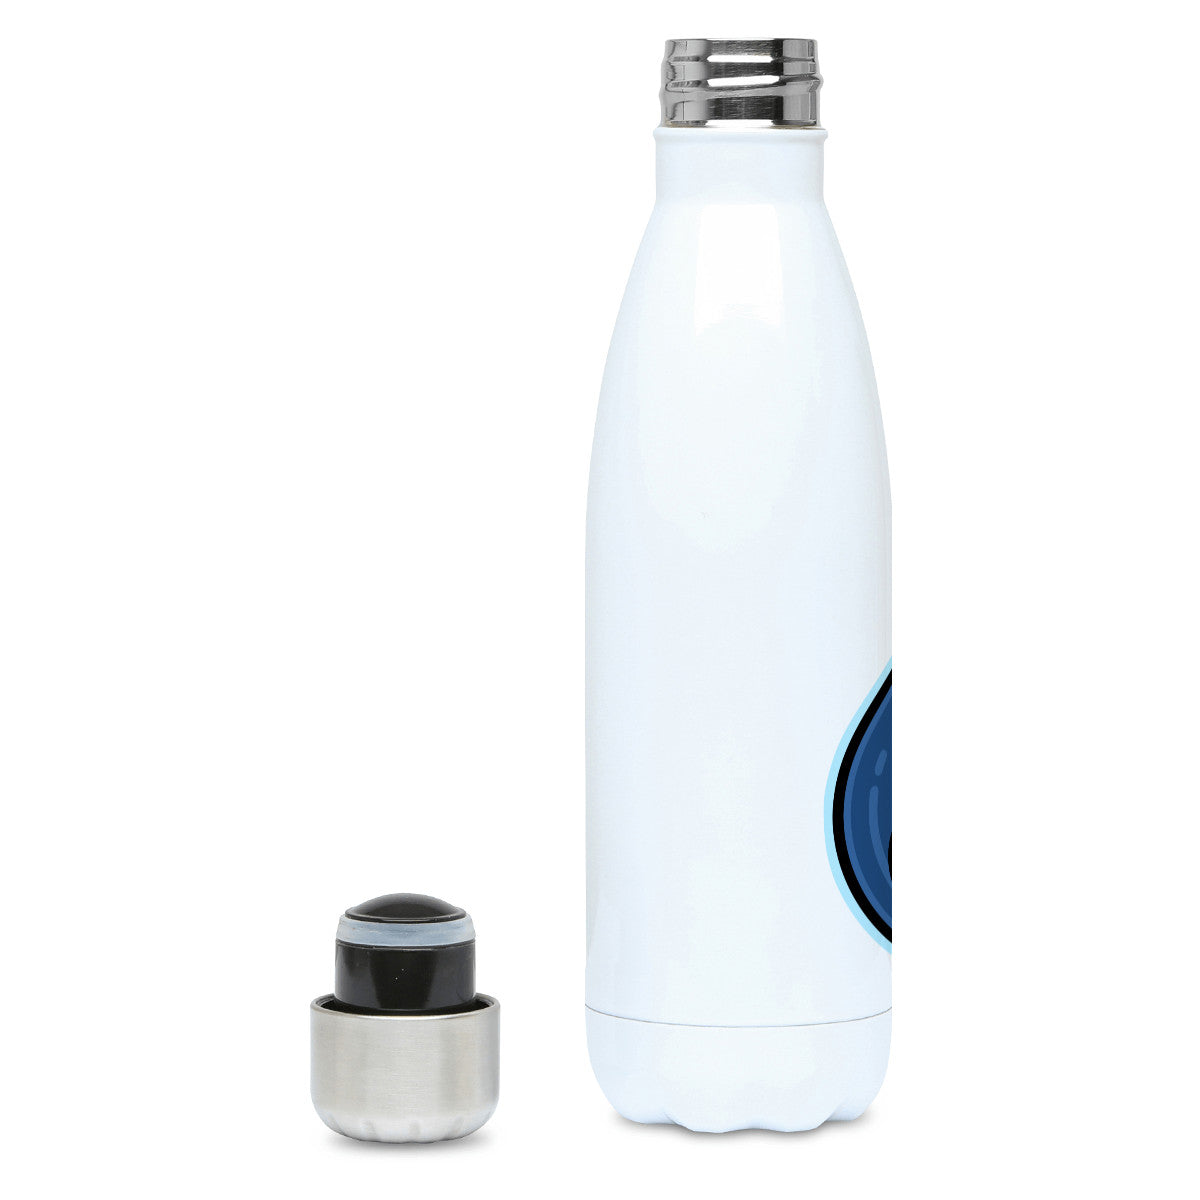 Kawaii cute blue droplet of water design on a white metal insulated drinks bottle, lid off